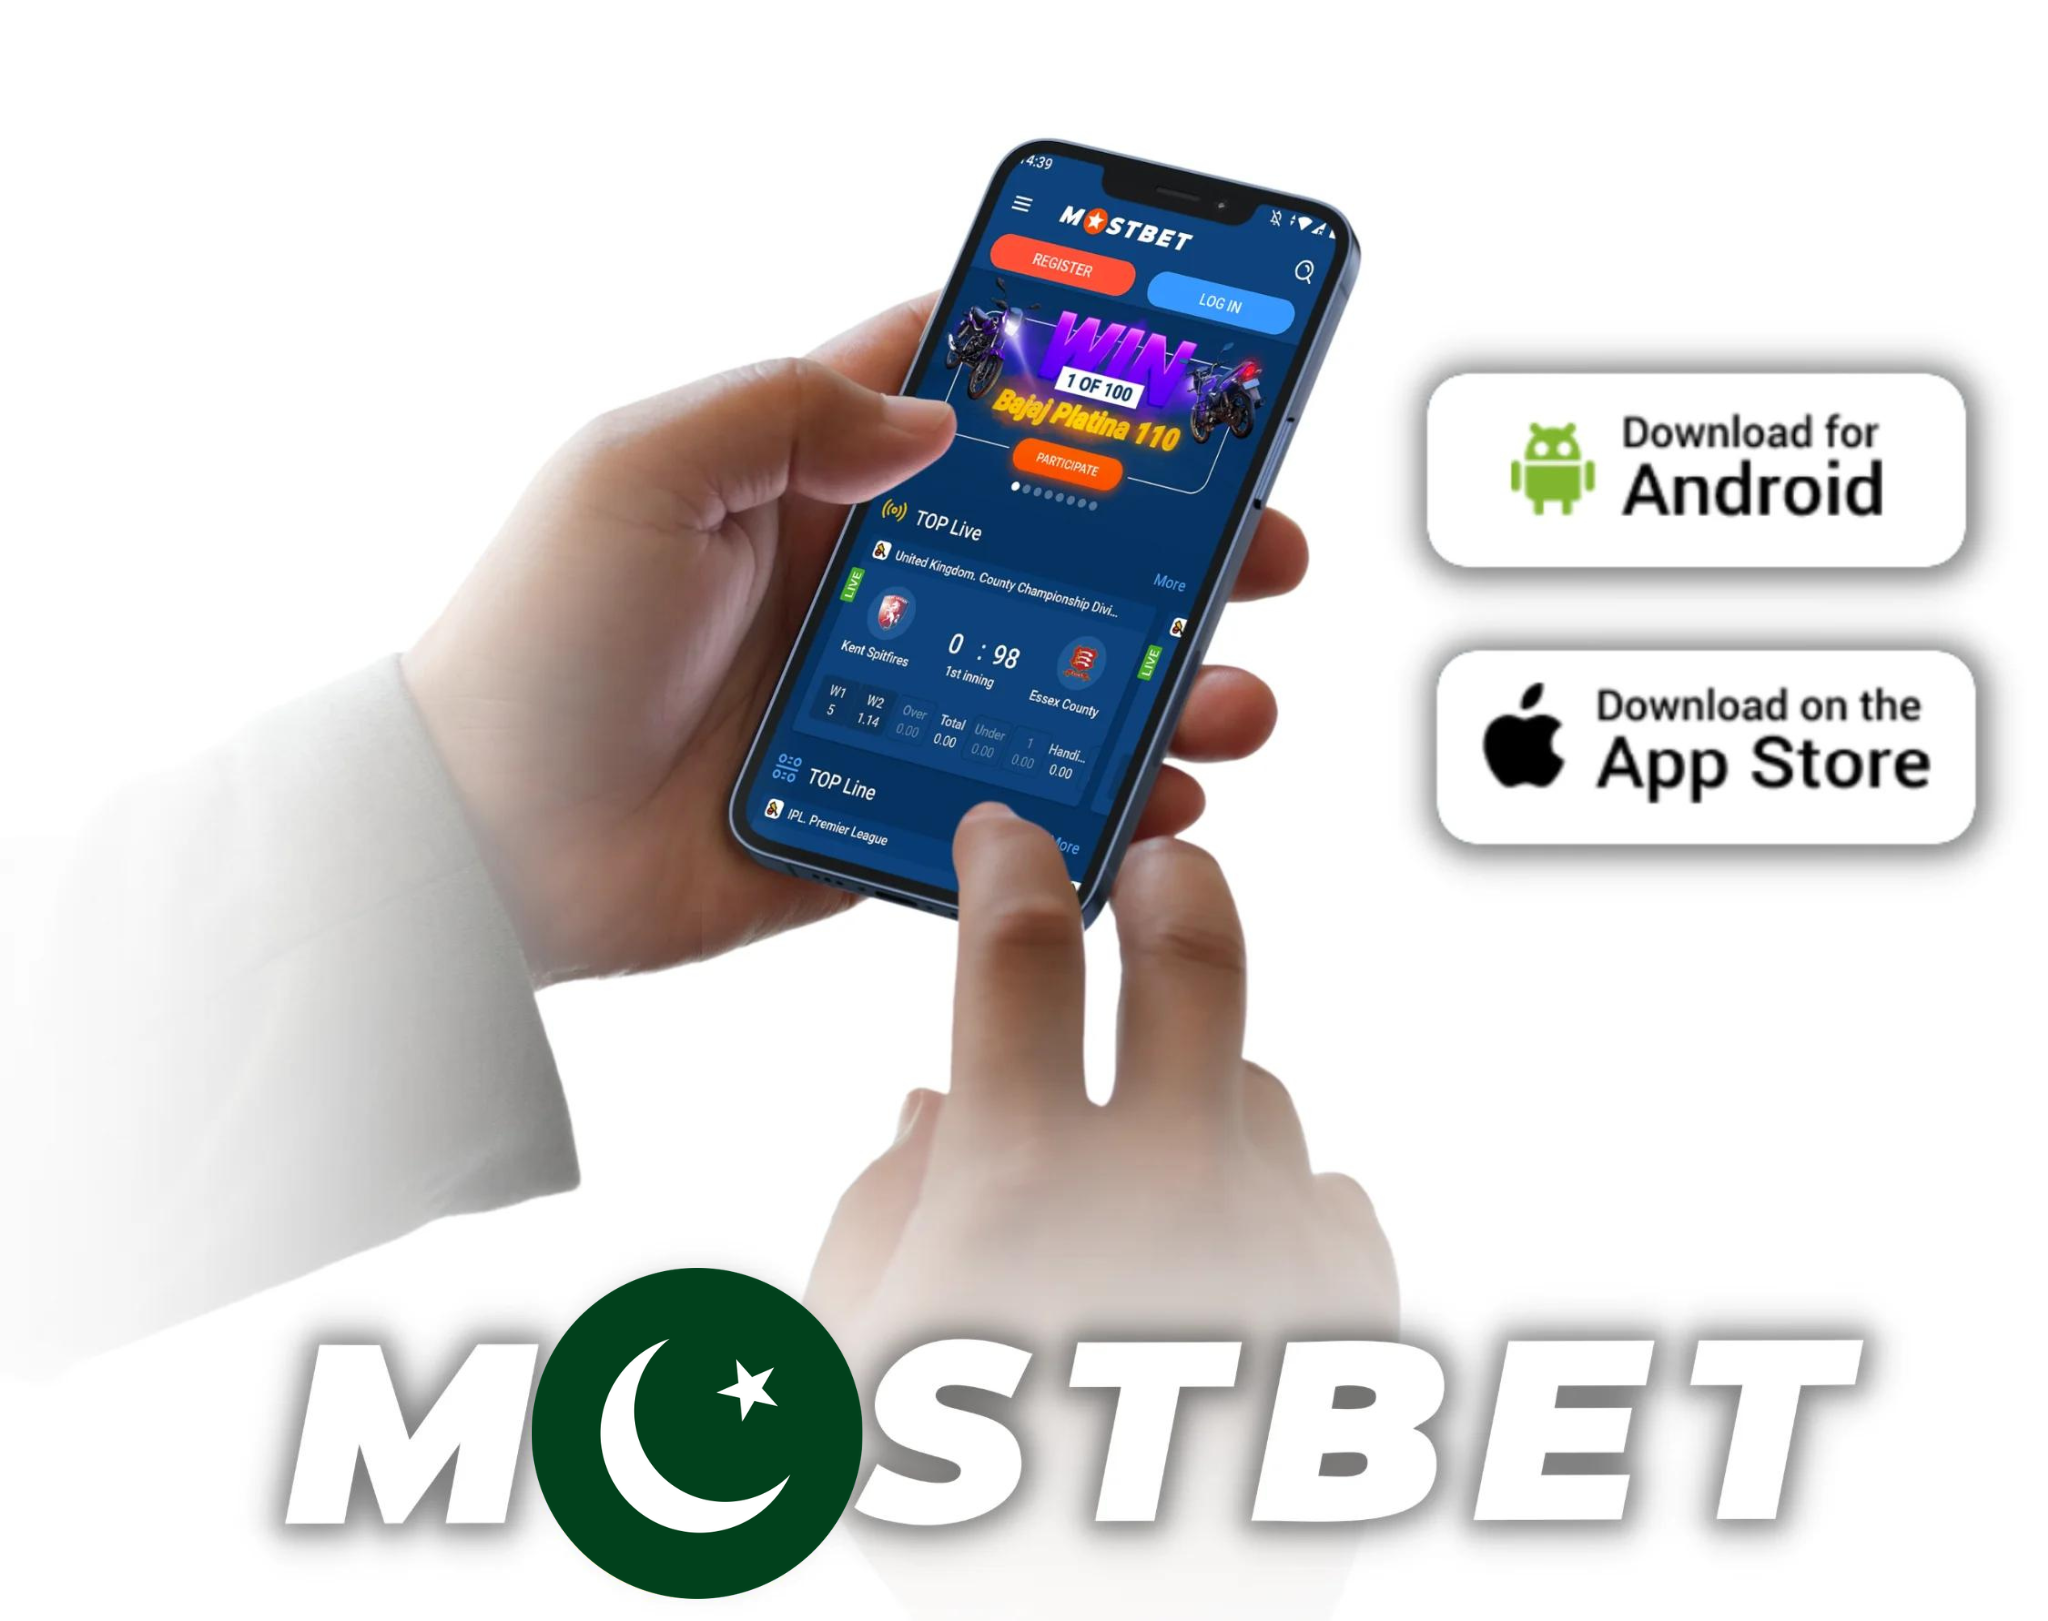 Mostbet mobile application in Pakistan